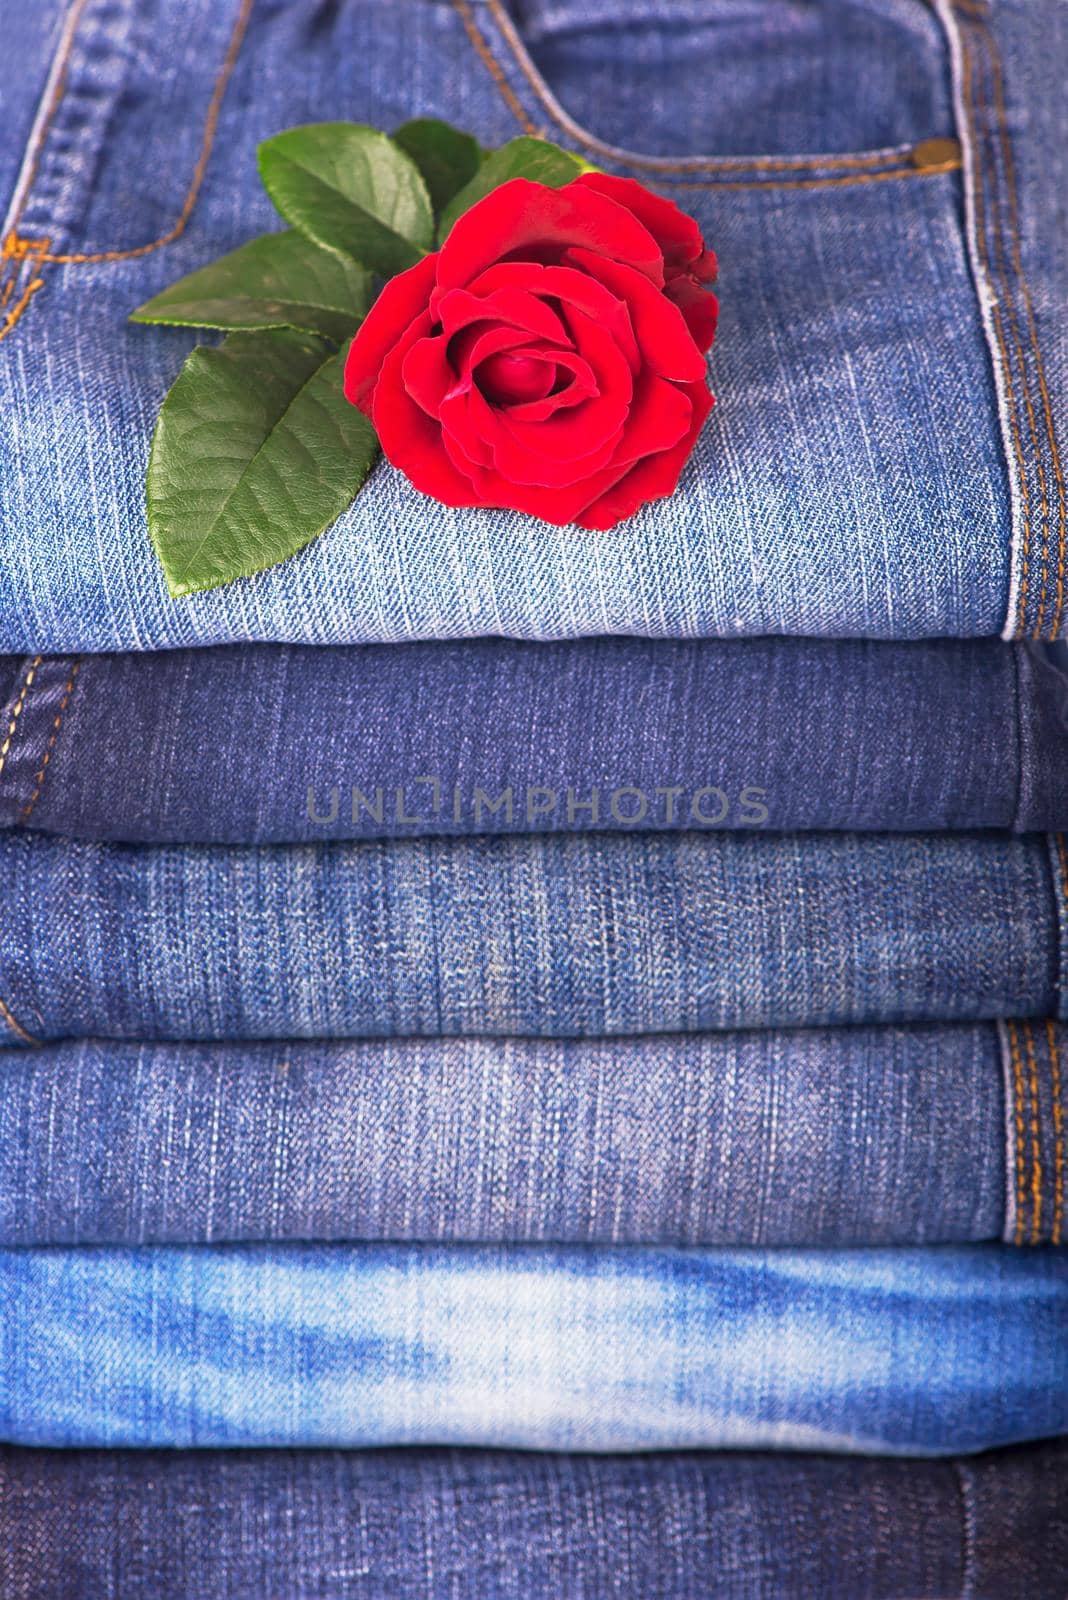 red rose and jeans dark blue close up